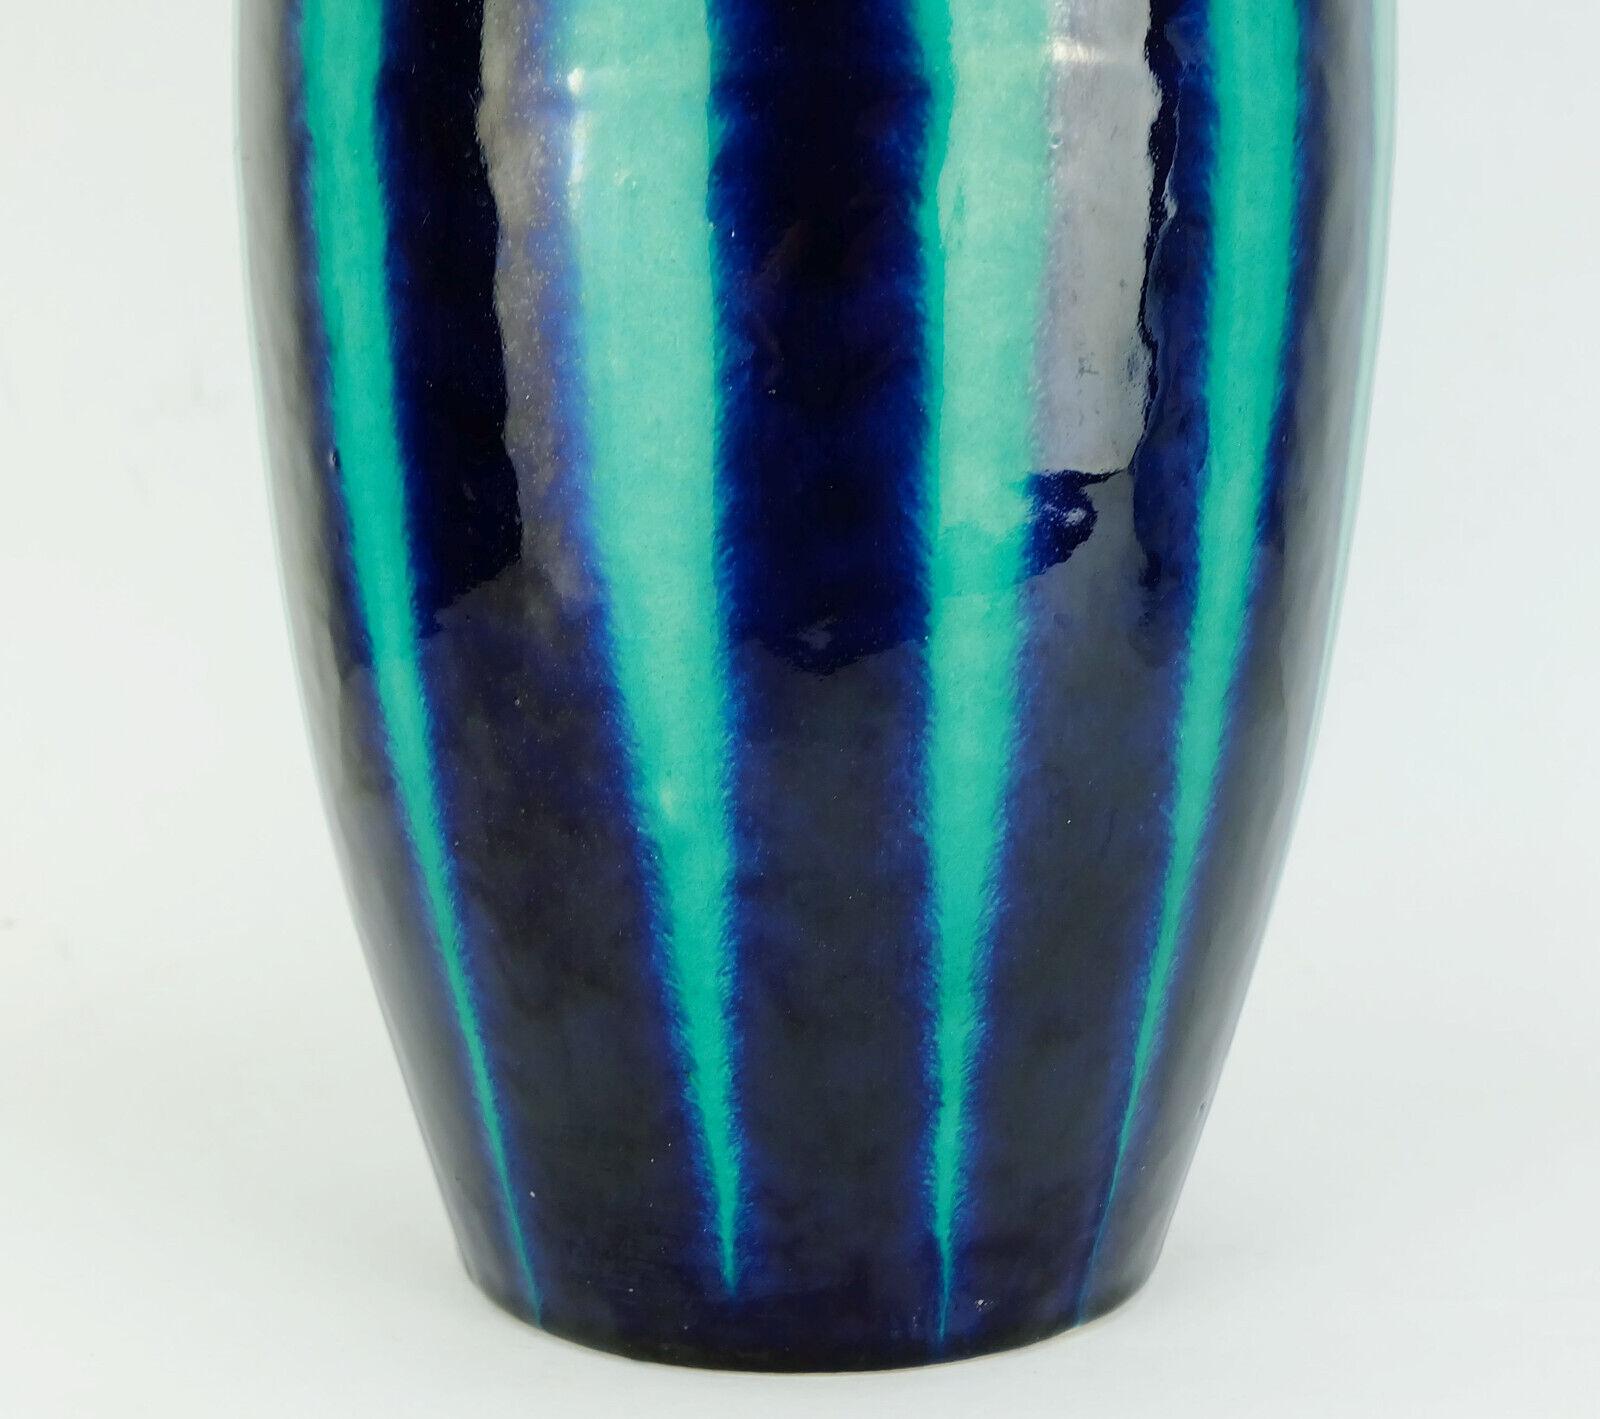 Stunning West German vase manufactured by Scheurich Keramik in the late 1950s. Model number 248-38 with stripe pattern in blue and emerald green.

Height 14 1/2